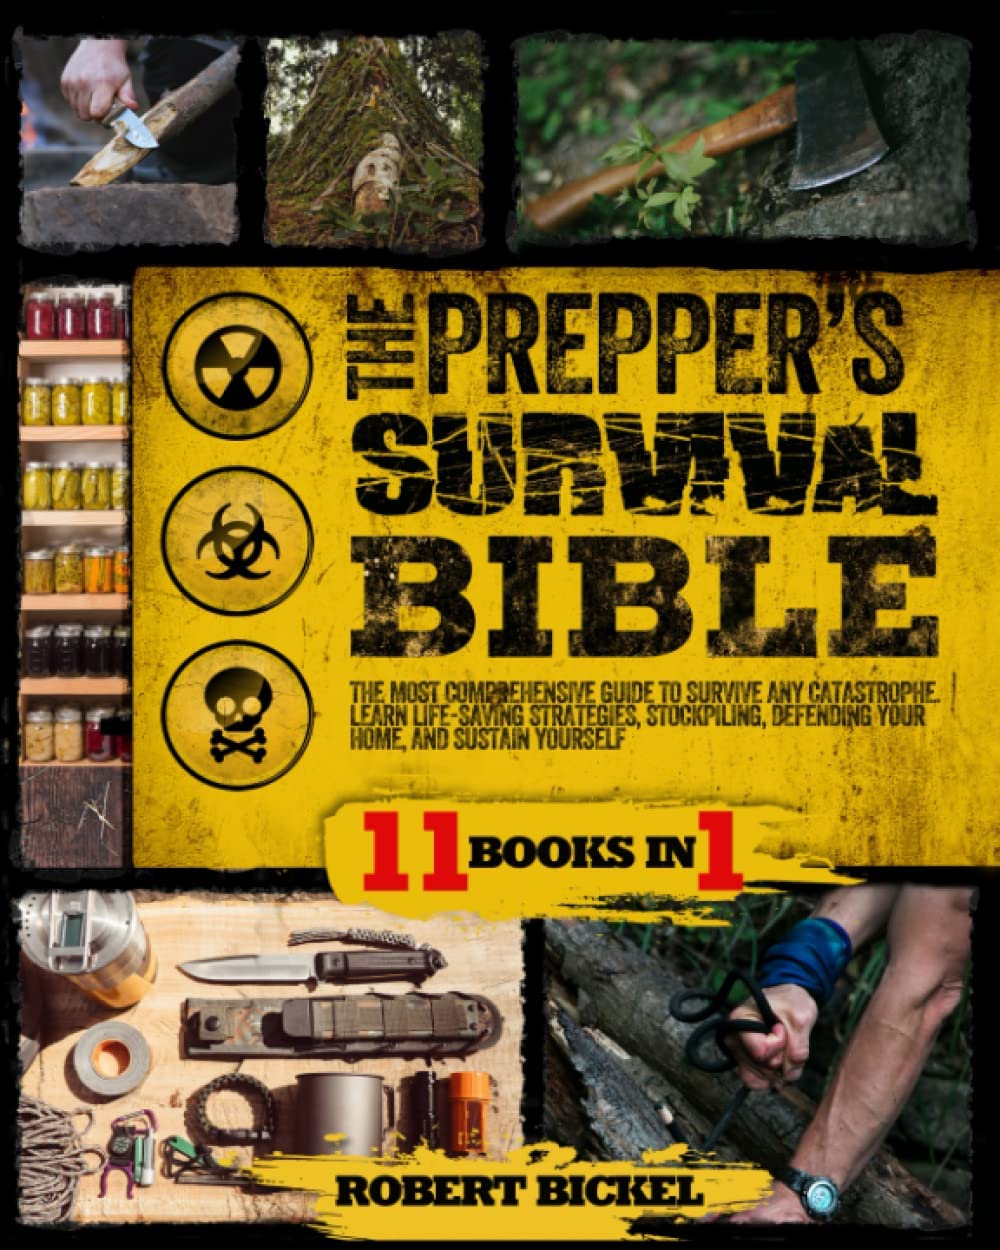 The Prepper’s Survival Bible: The Most Comprehensive Guide to Survive Any Catastrophe. Learn Life-Saving Strategies, Stockpiling, Defending Your Home, and Sustain Yourself Living Off-Grid